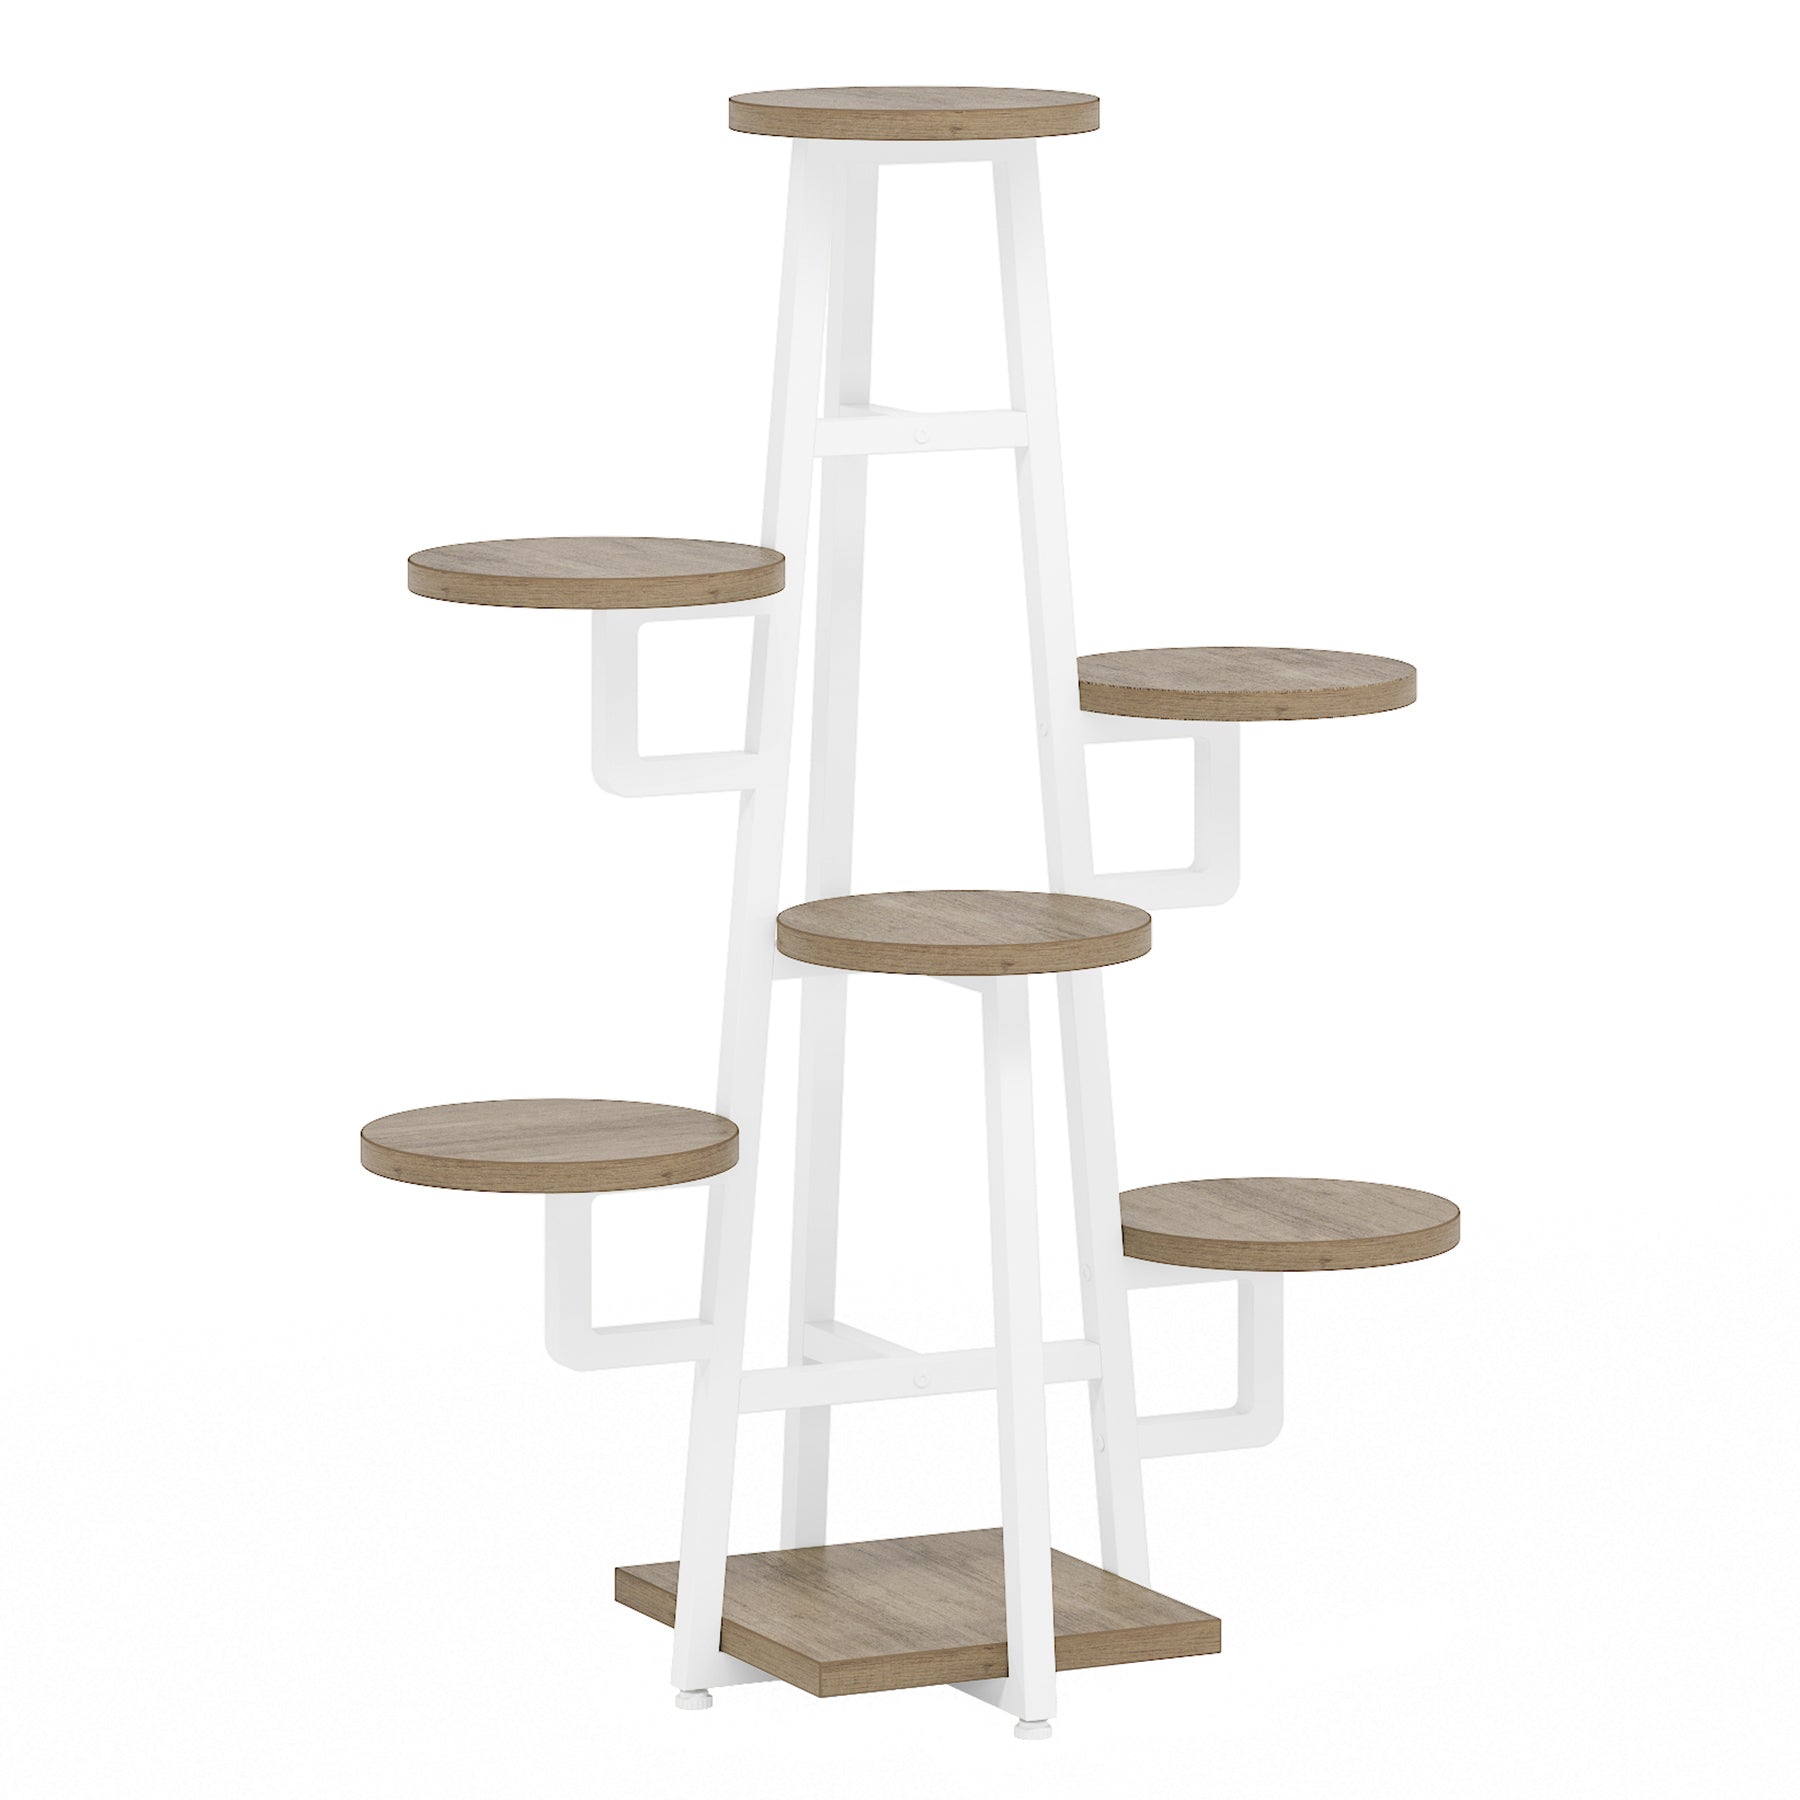 7-Tier Plant Stand, 43.3